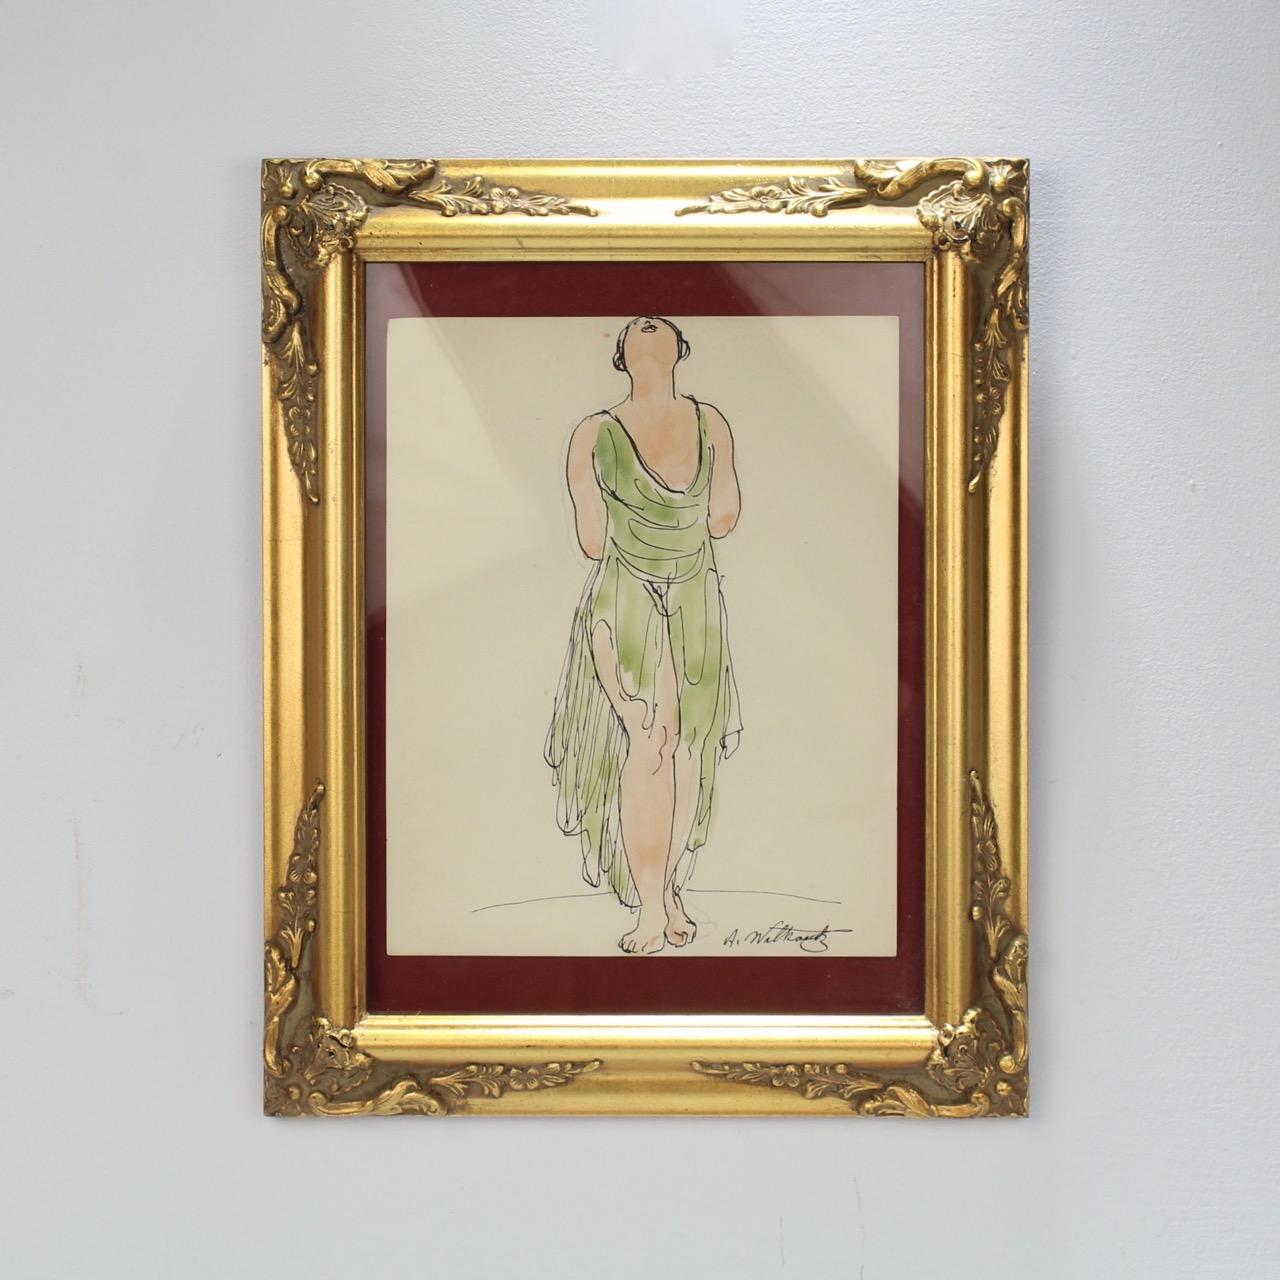 A fine drawing in ink and watercolor on paper of the modernist dancer Isadora Duncan by Abraham Walkowitz.

Walkowitz (1878-1965) had an intimate artistic relationship with Duncan. He drew her in dance literally thousands of times. 

This image